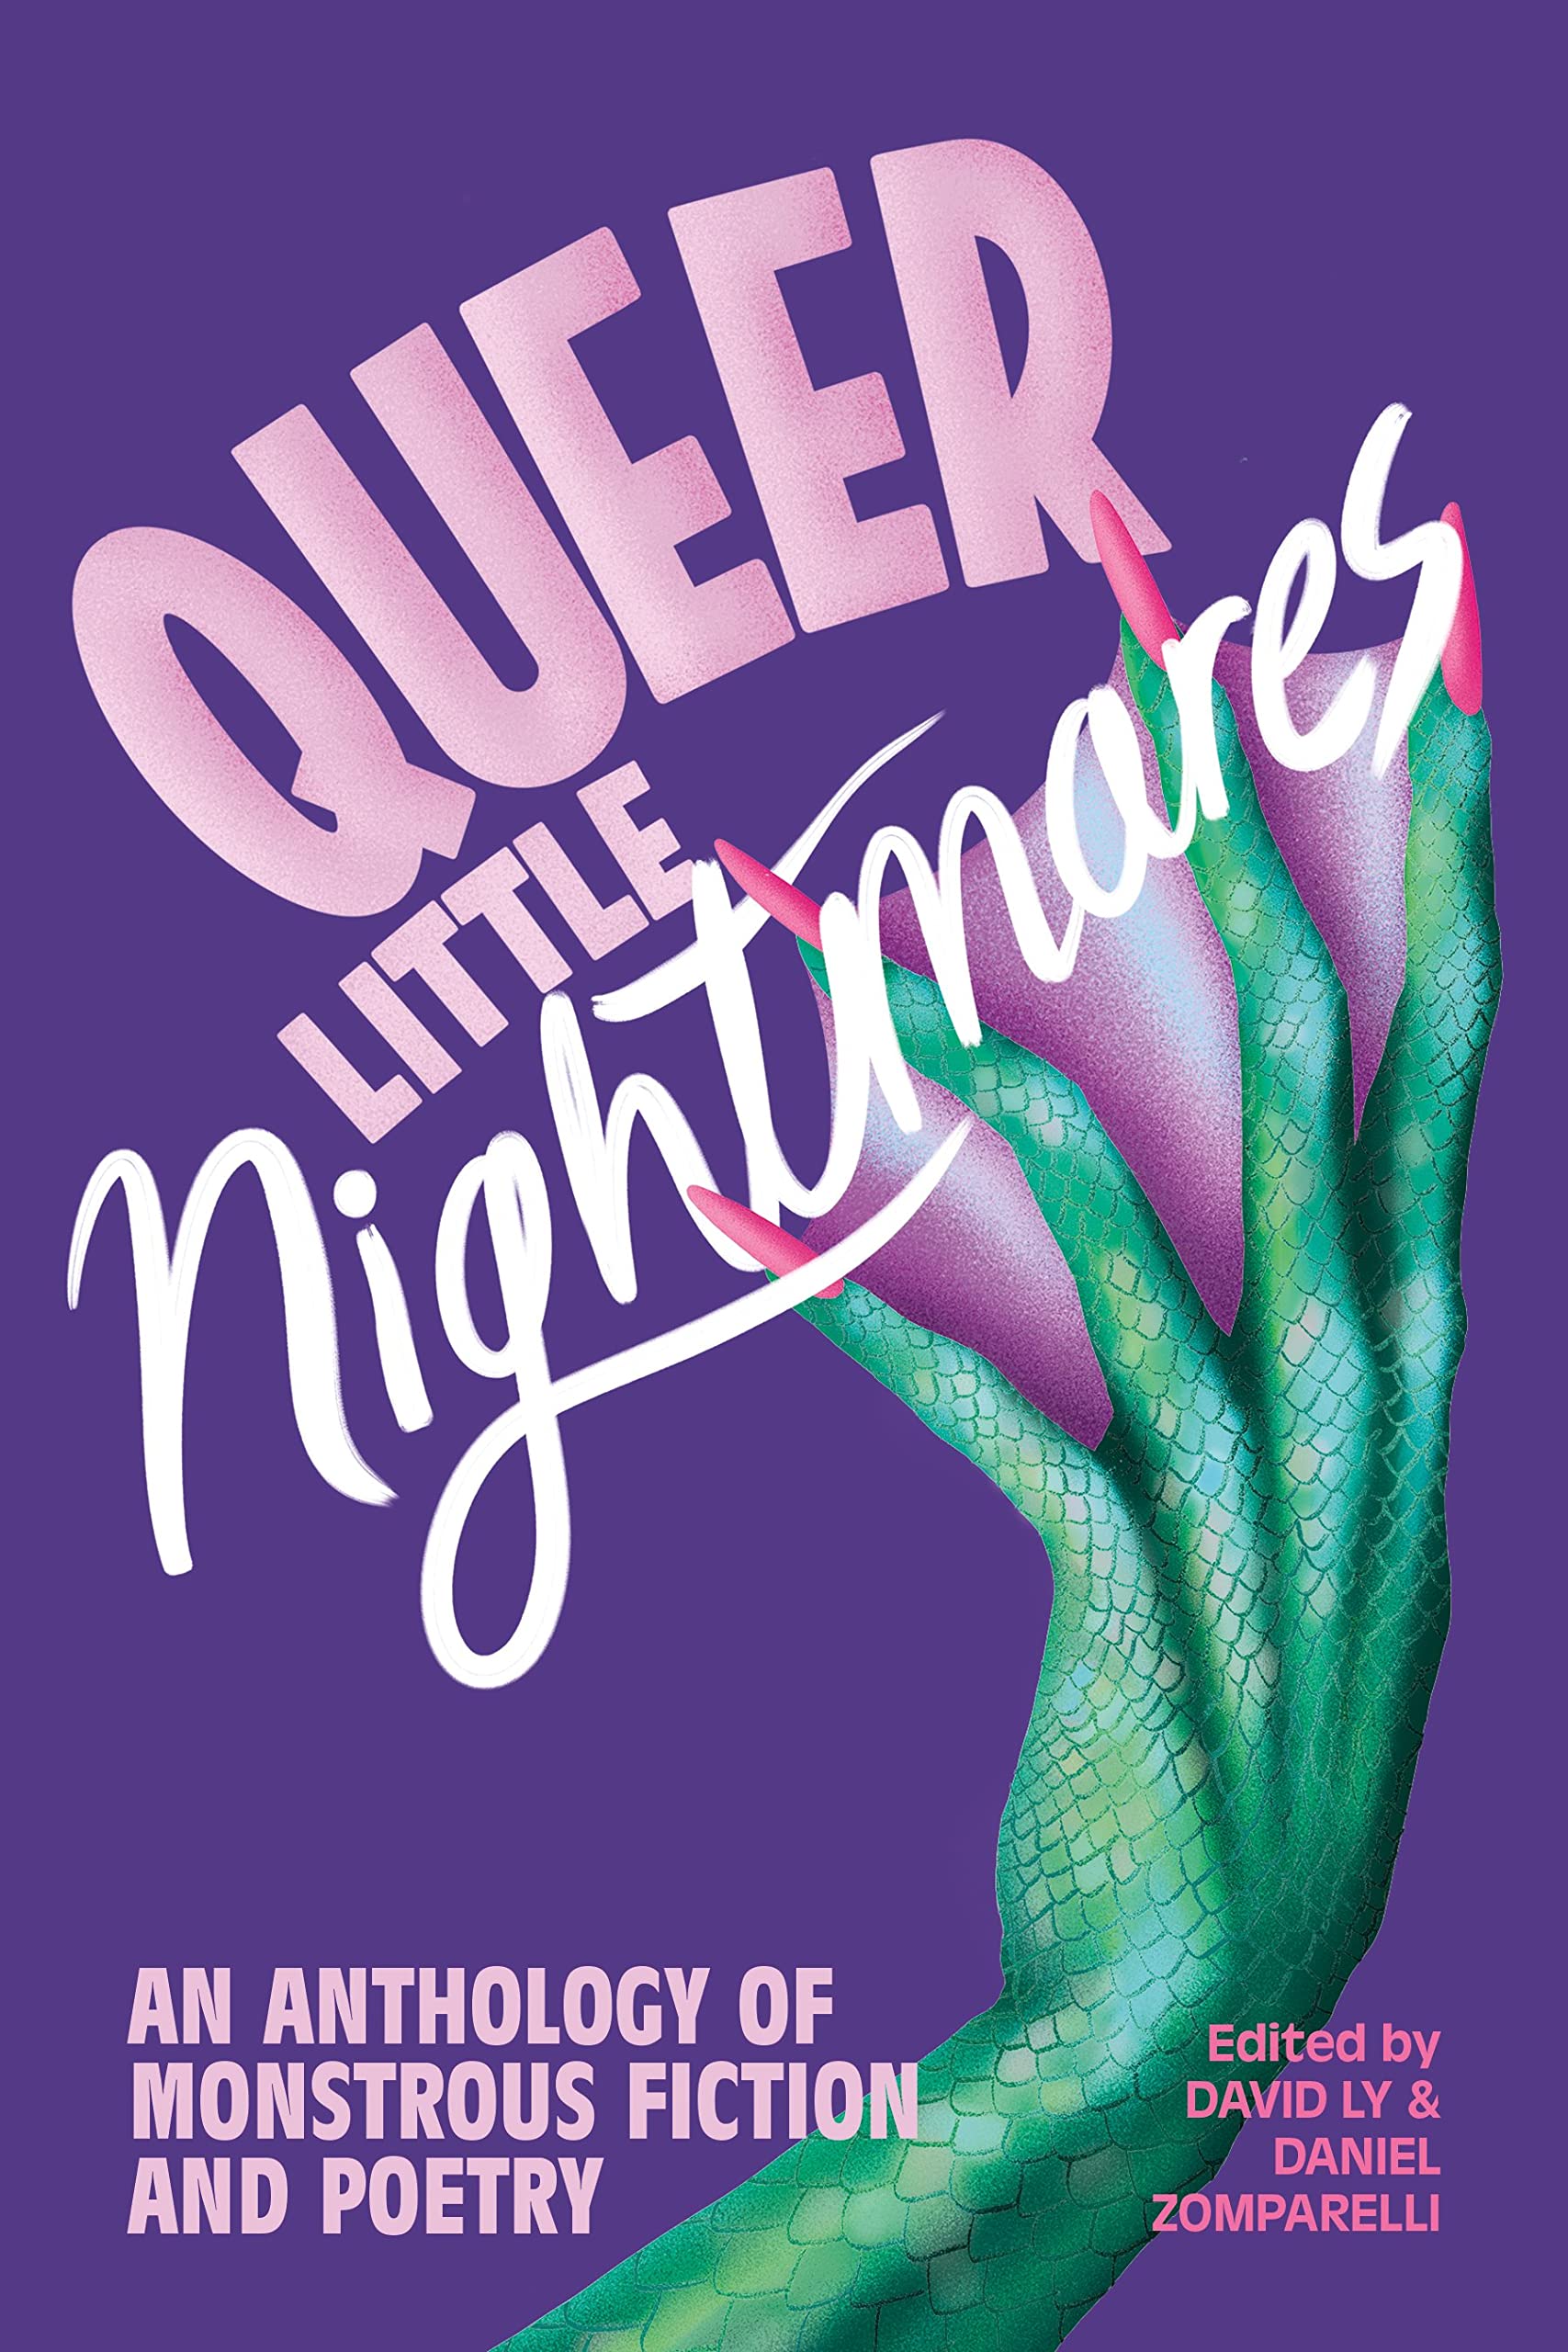 Queer Little Nightmares purple book cover that includes the hand of a monster with long painted nails